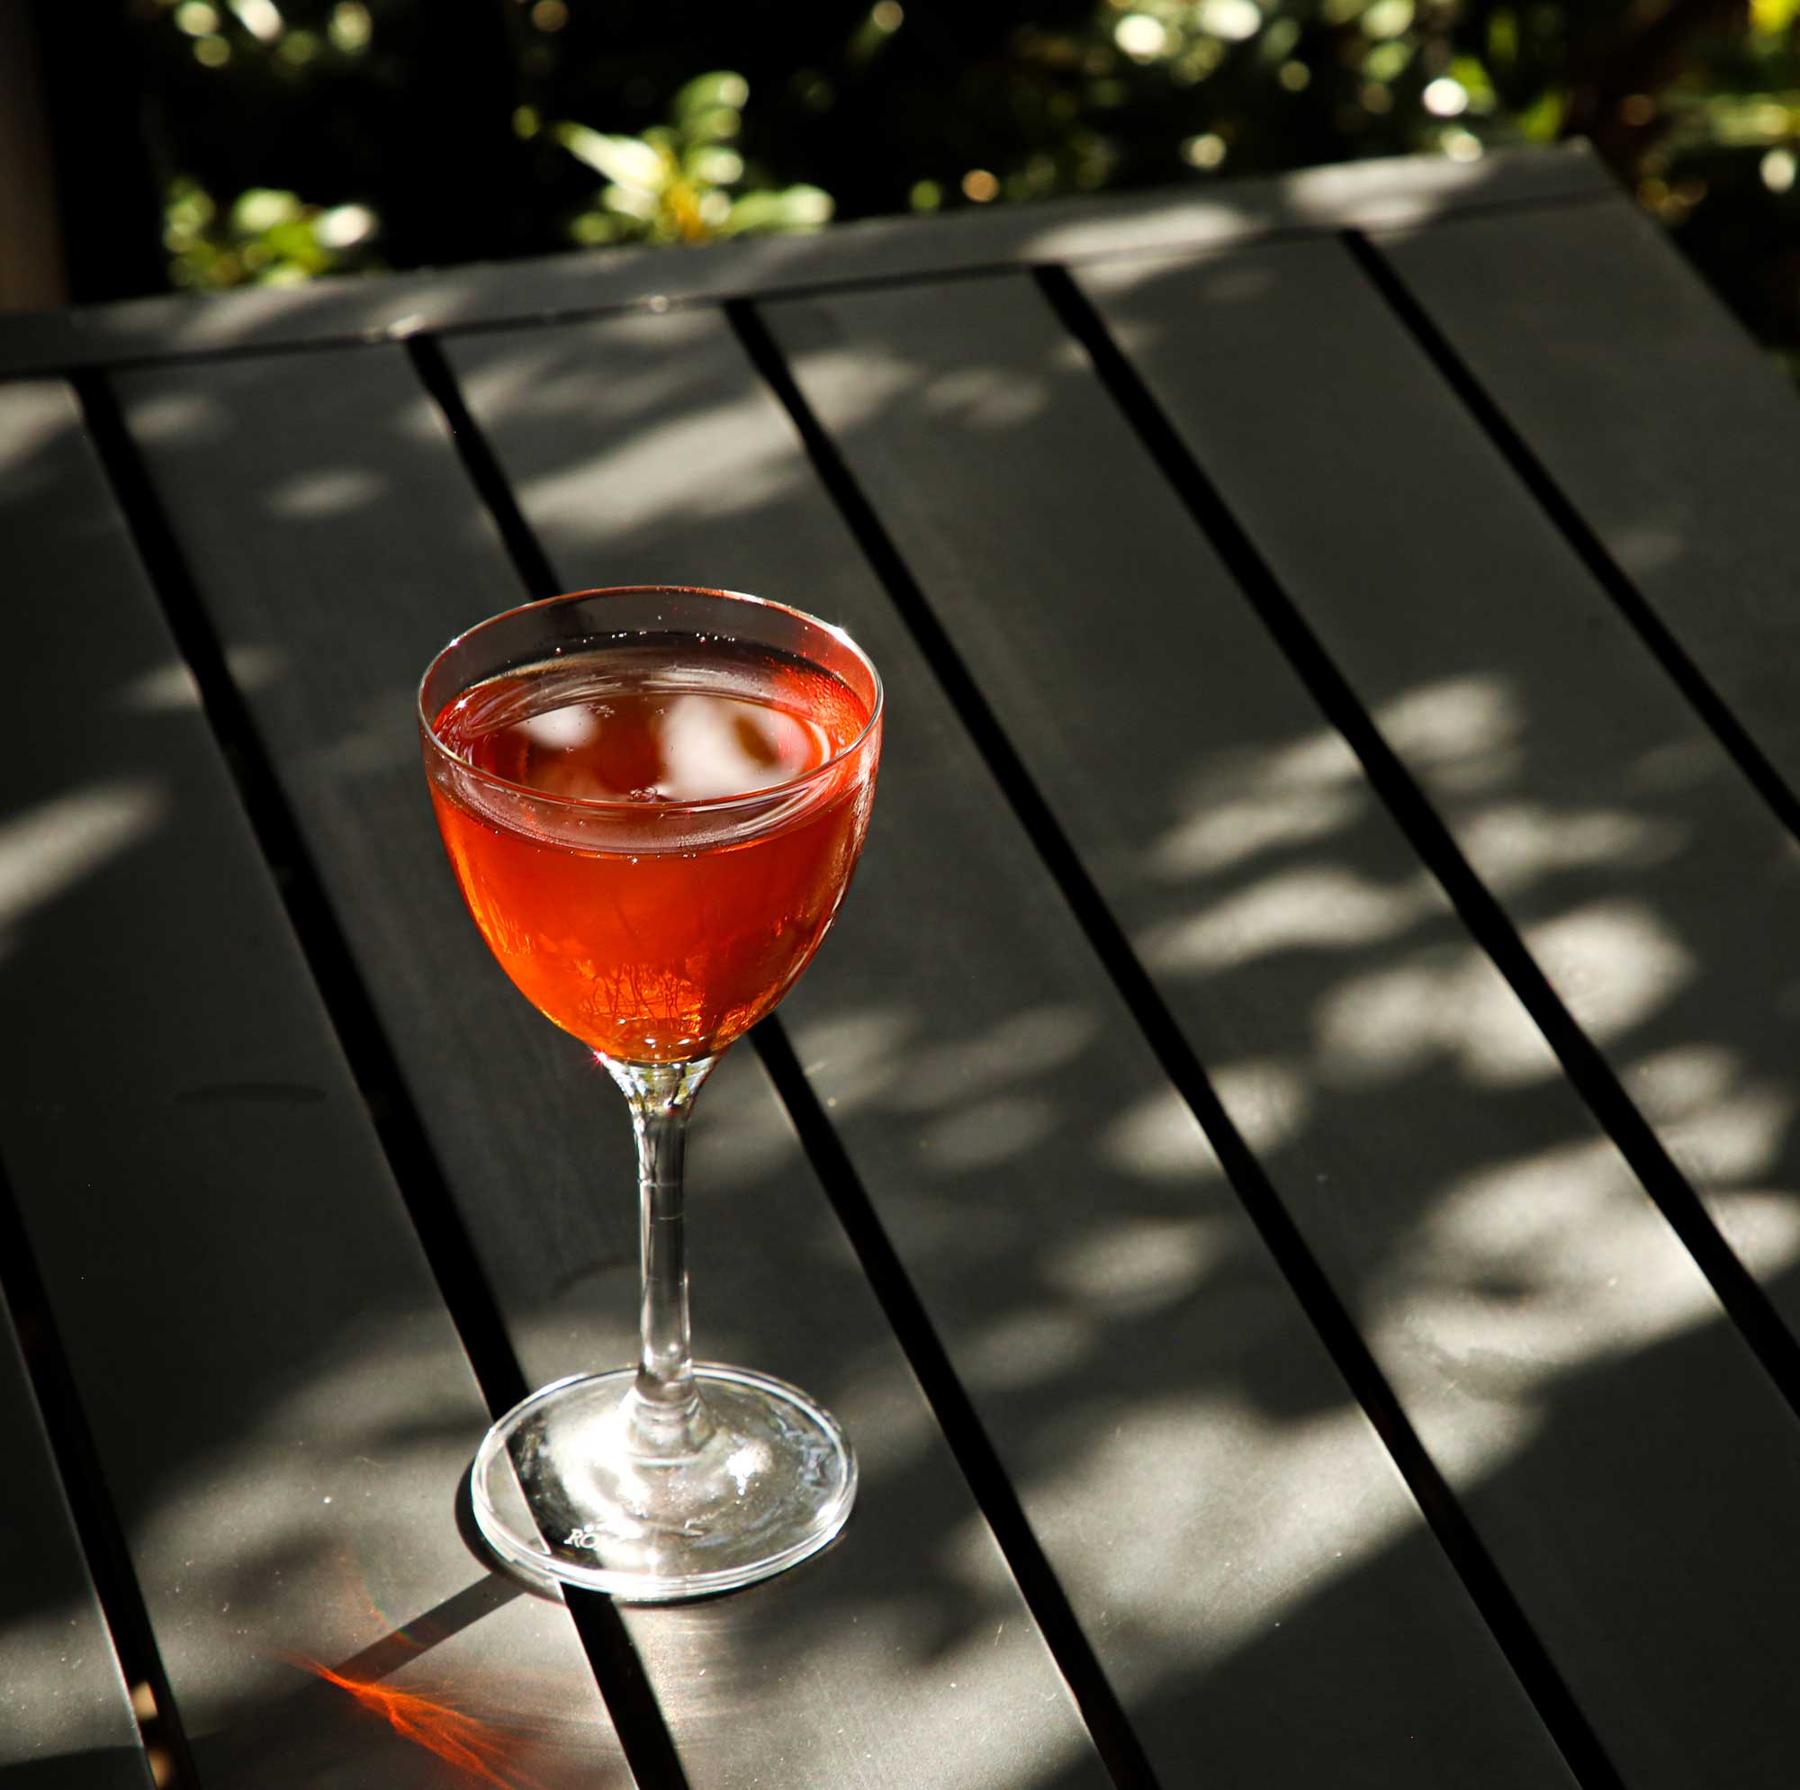 An example of the Caldera, the mixed drink (drink), by Liz Kelley, Cure, New Orleans, featuring reposado tequila, Aperitivo Cappelletti, Zirbenz Stone Pine Liqueur of the Alps, and grapefruit twist; photo by Liz Kelley